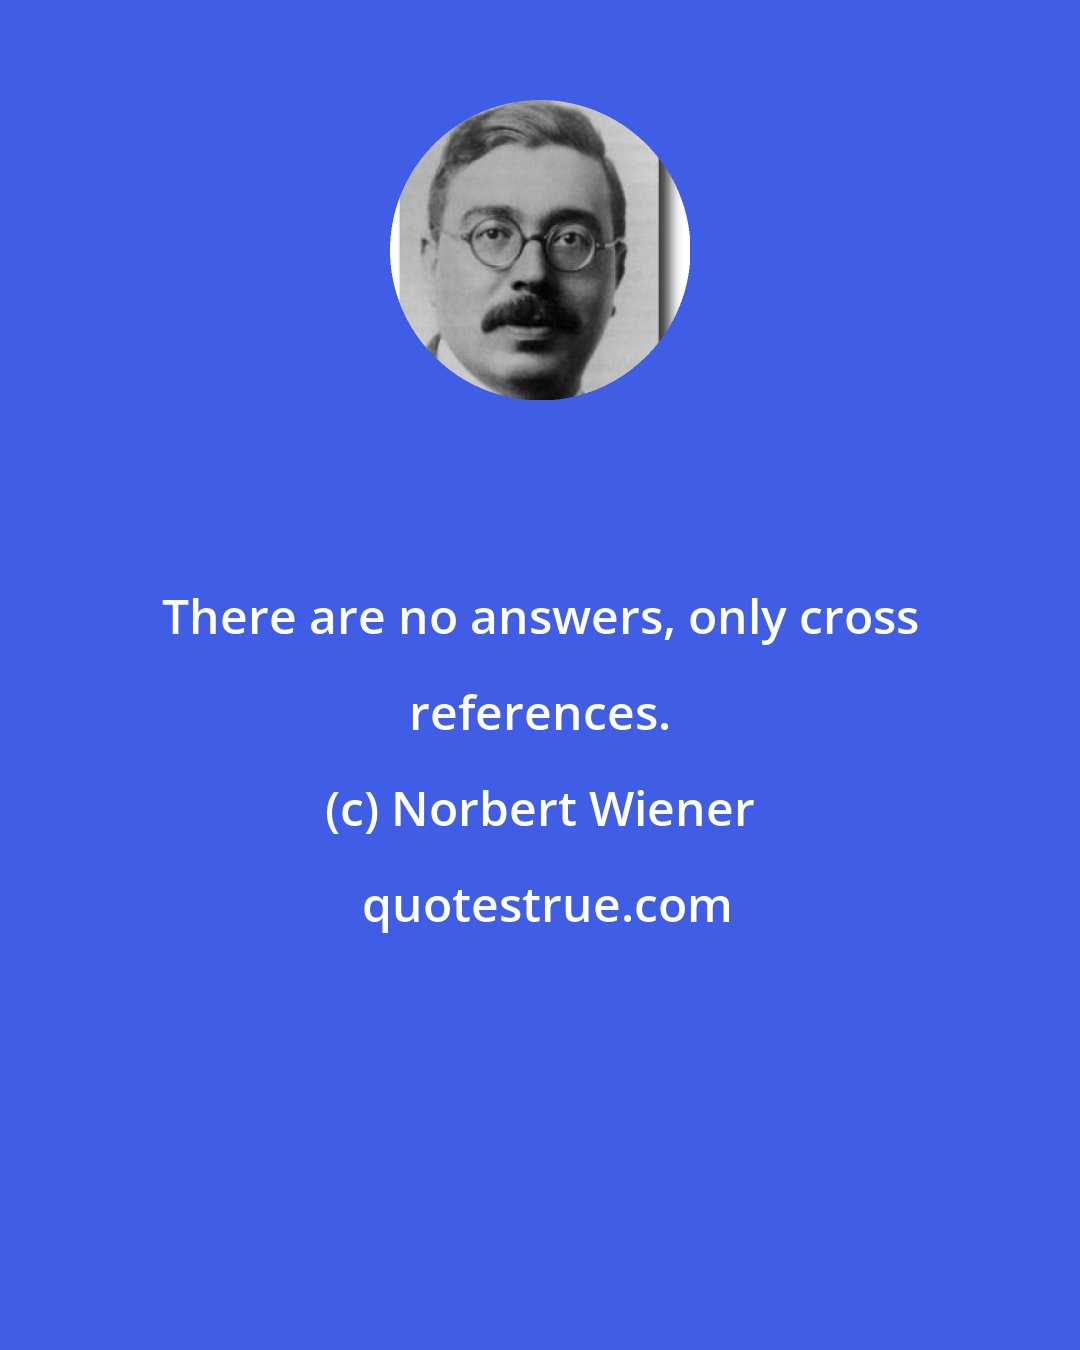 Norbert Wiener: There are no answers, only cross references.